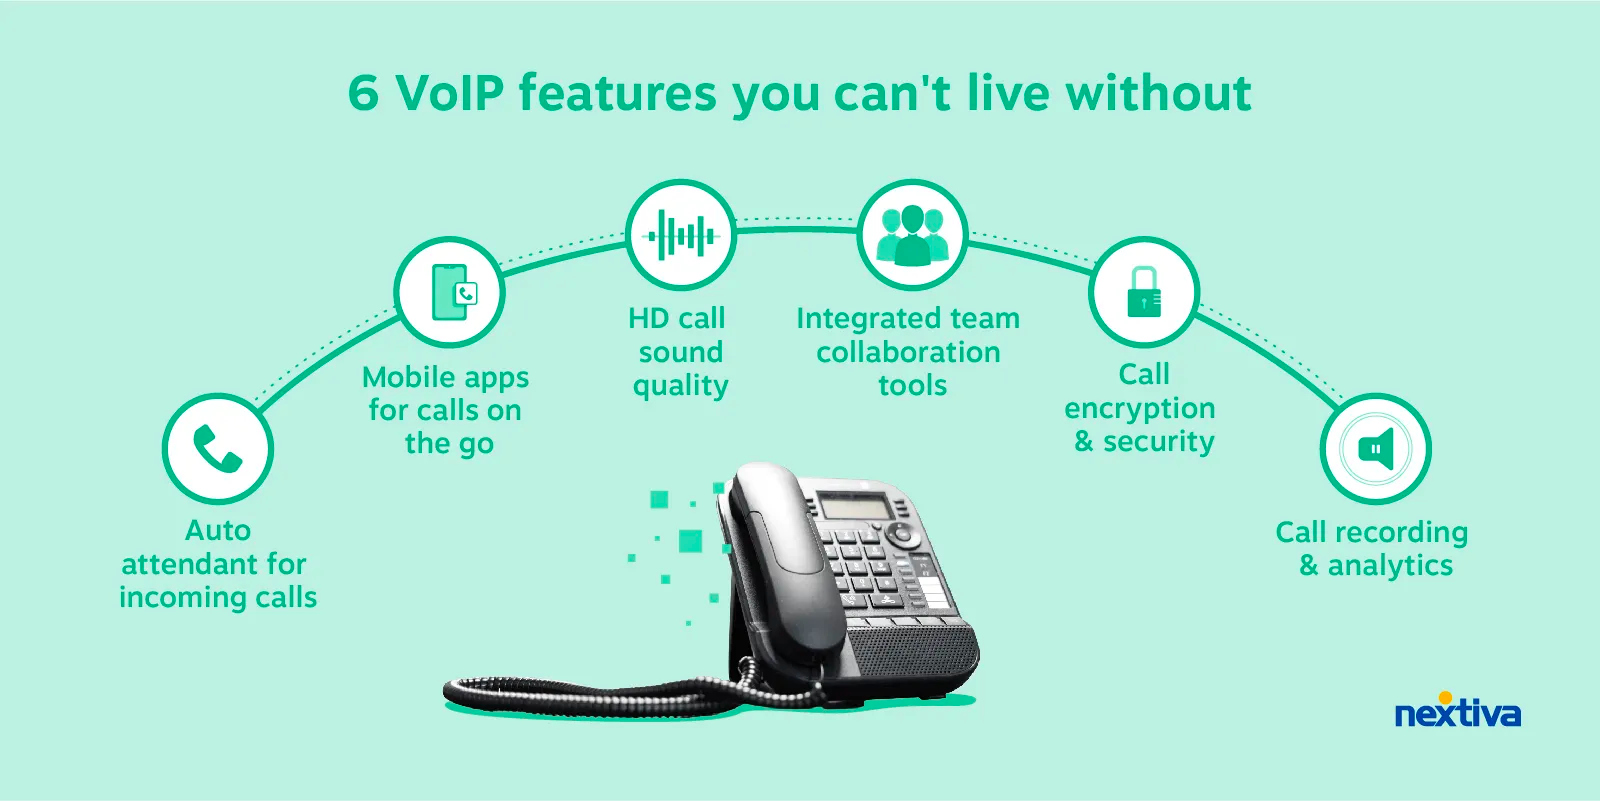 6 VoIP features you can't live without